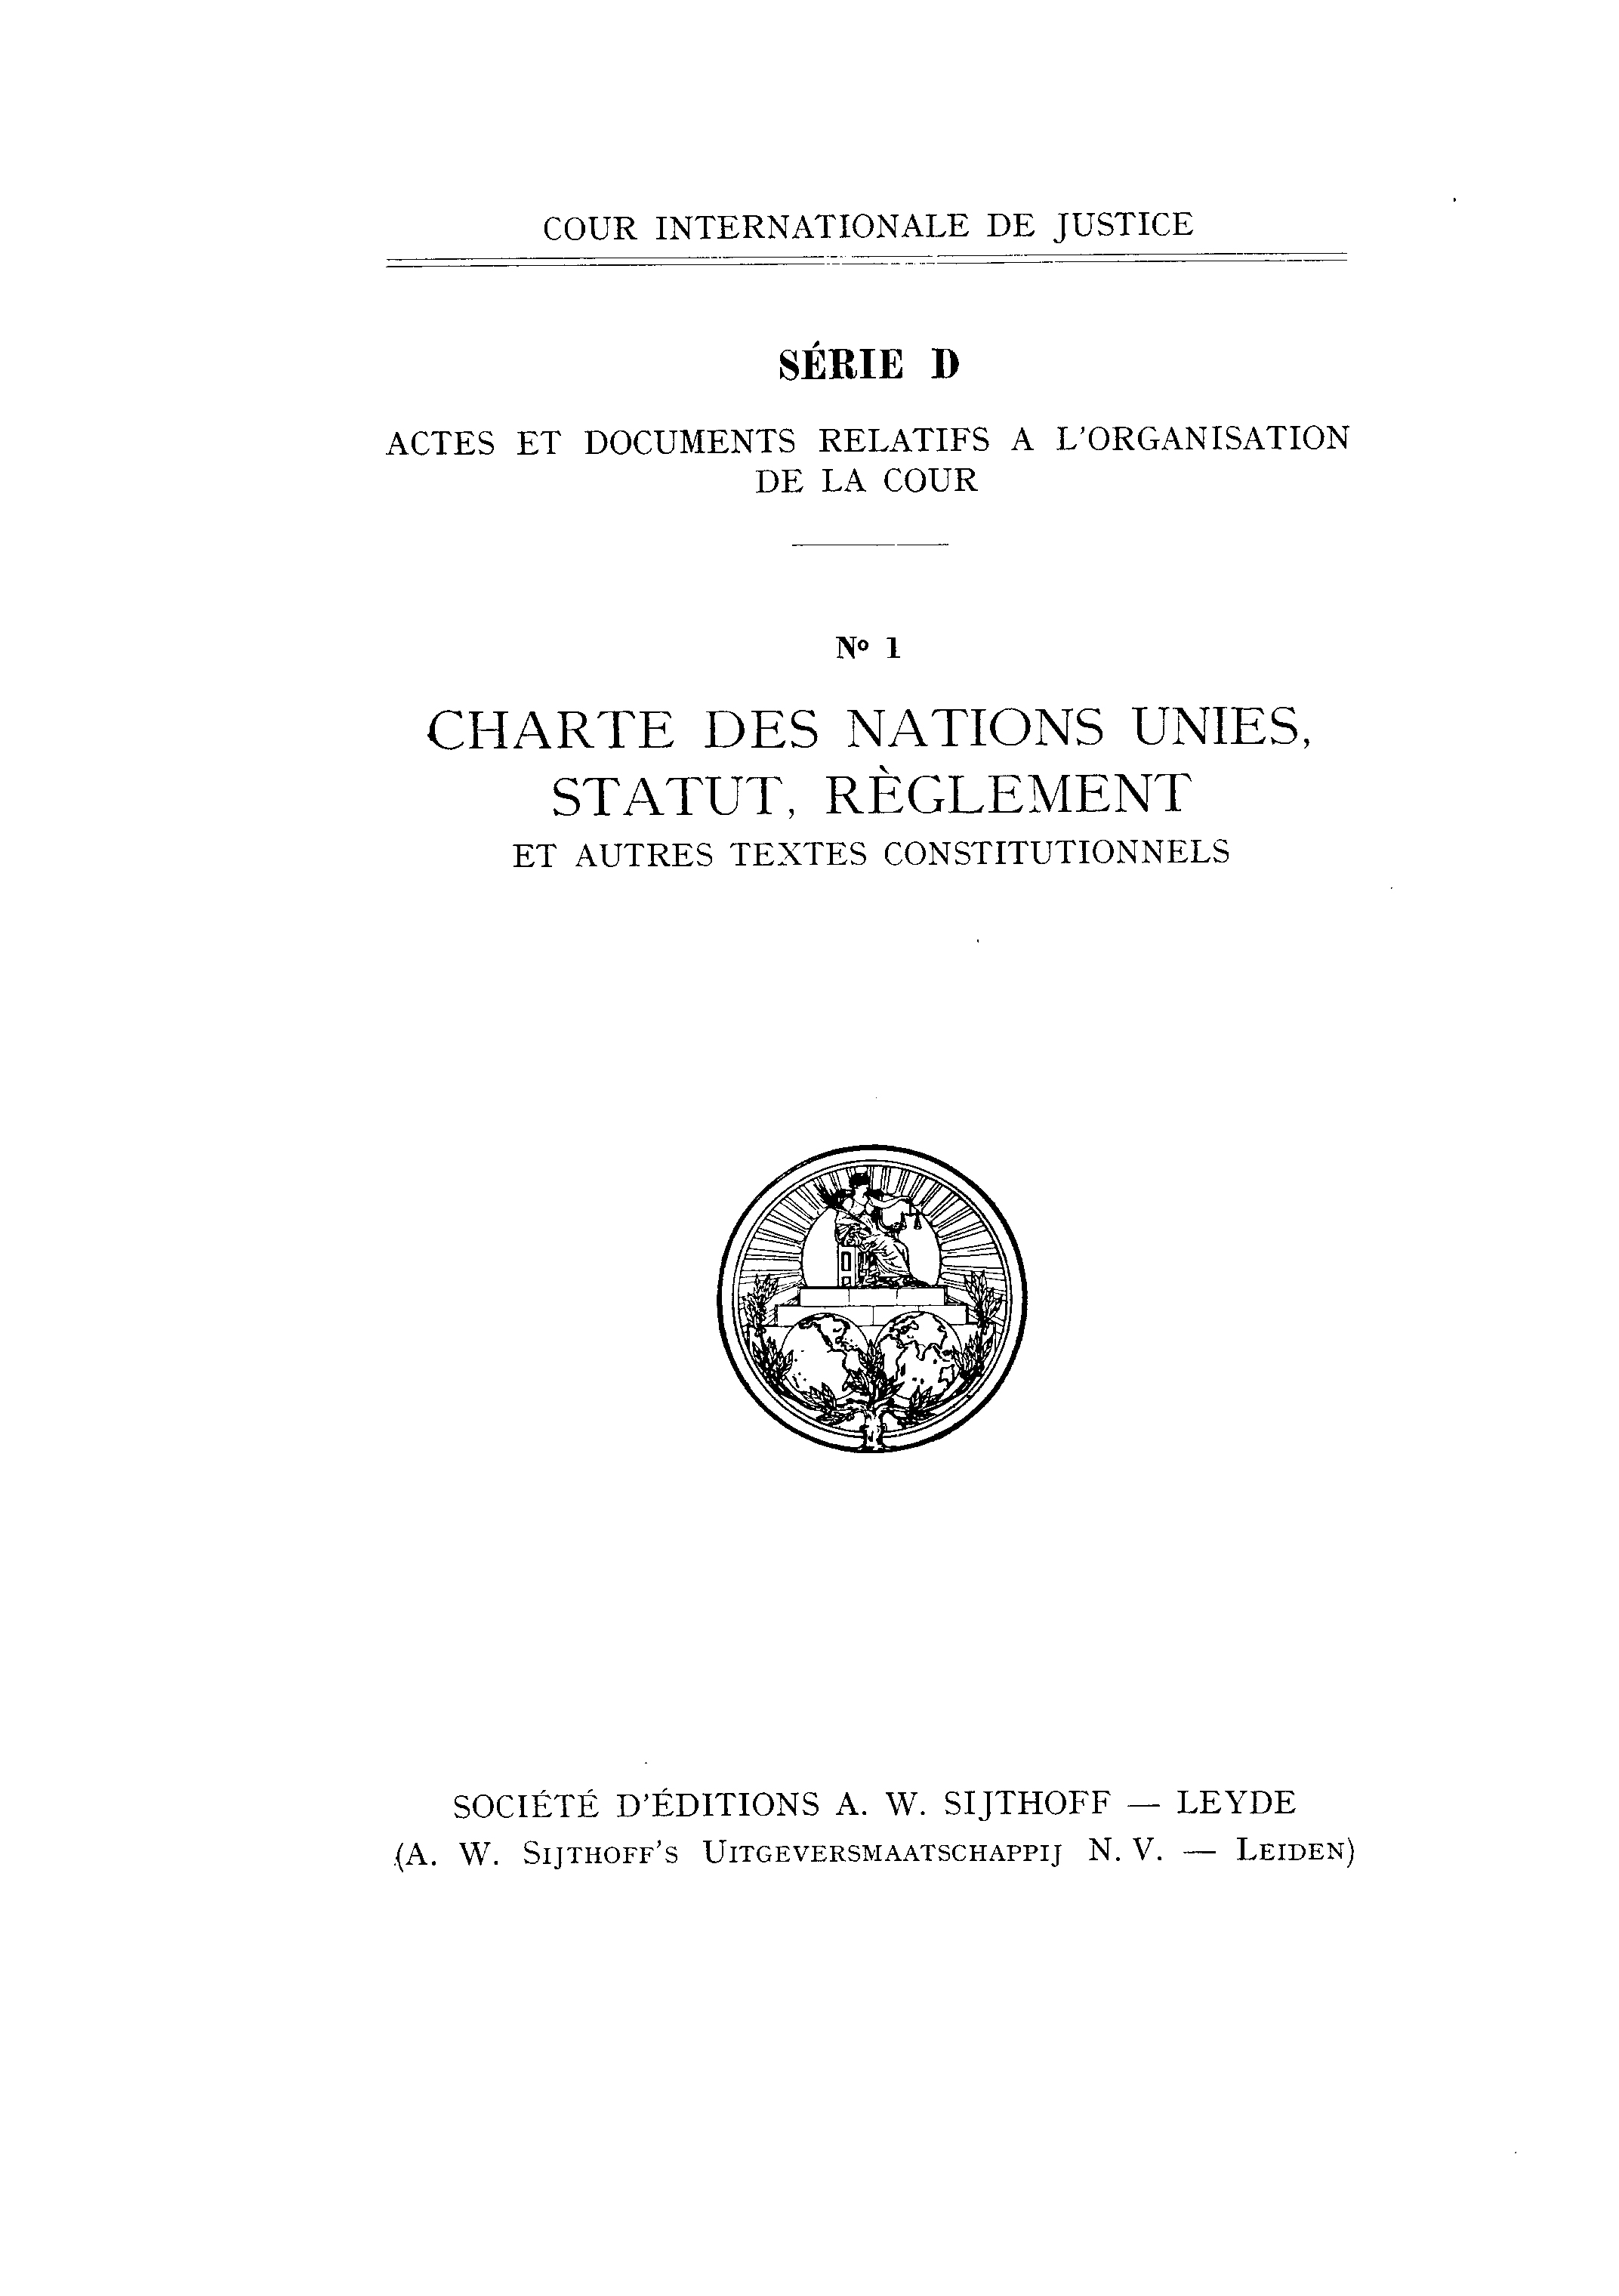 image of Acts and Documents Concerning the Organization of the Court No. 1